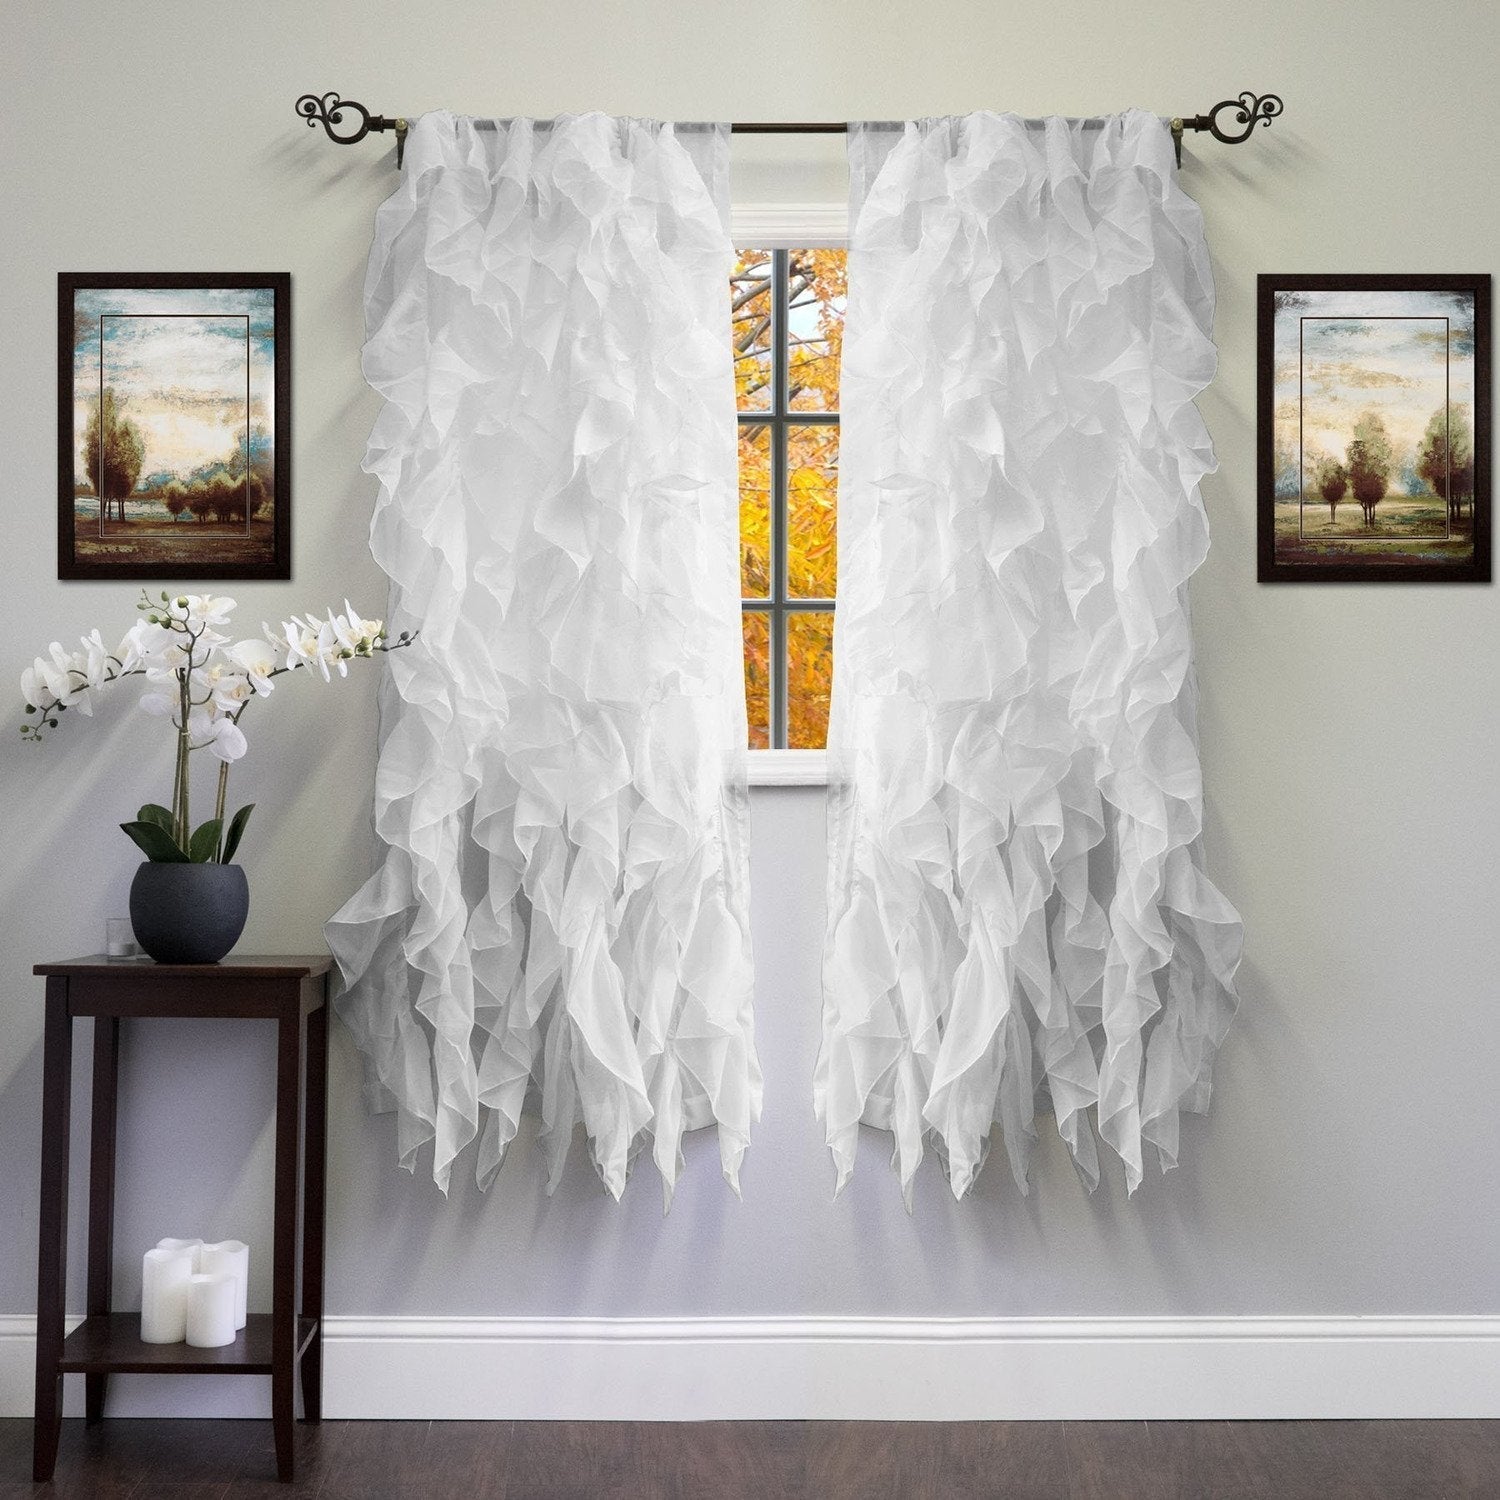 Chic Sheer Voile Ruffled Window Curtain 2-Pack Silver 63X100